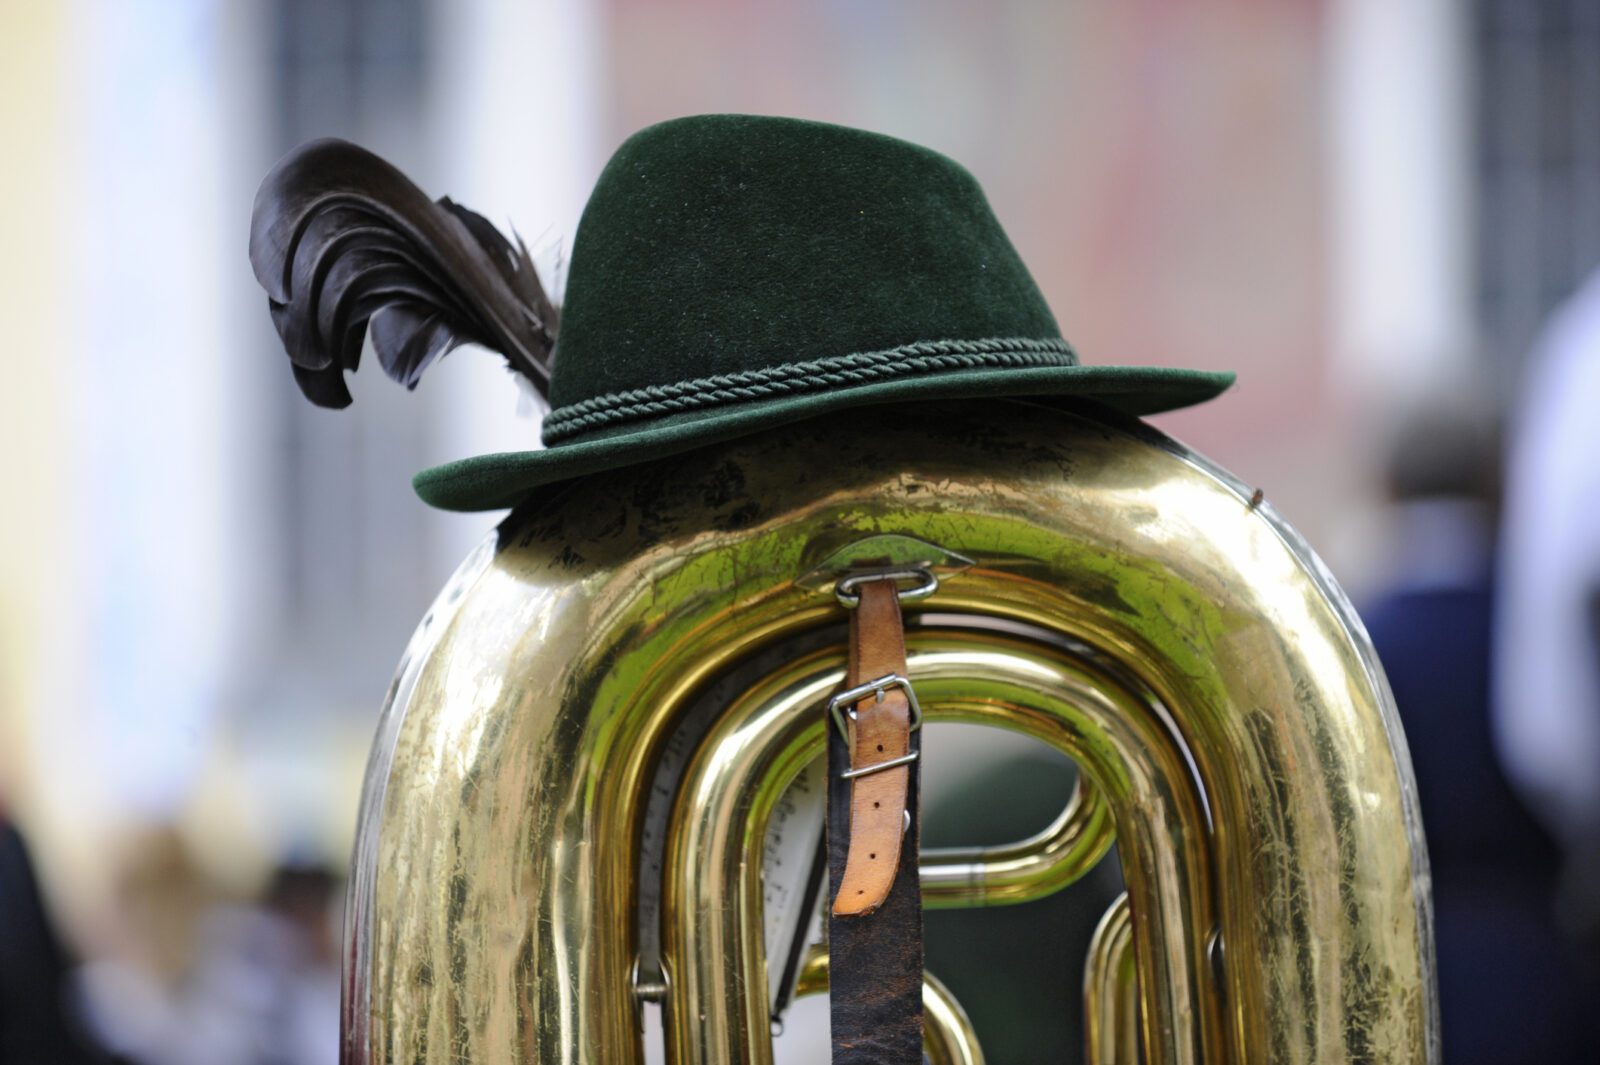 trumpet and hat of the member of bavarian brass band while Oktoberfest in Munich